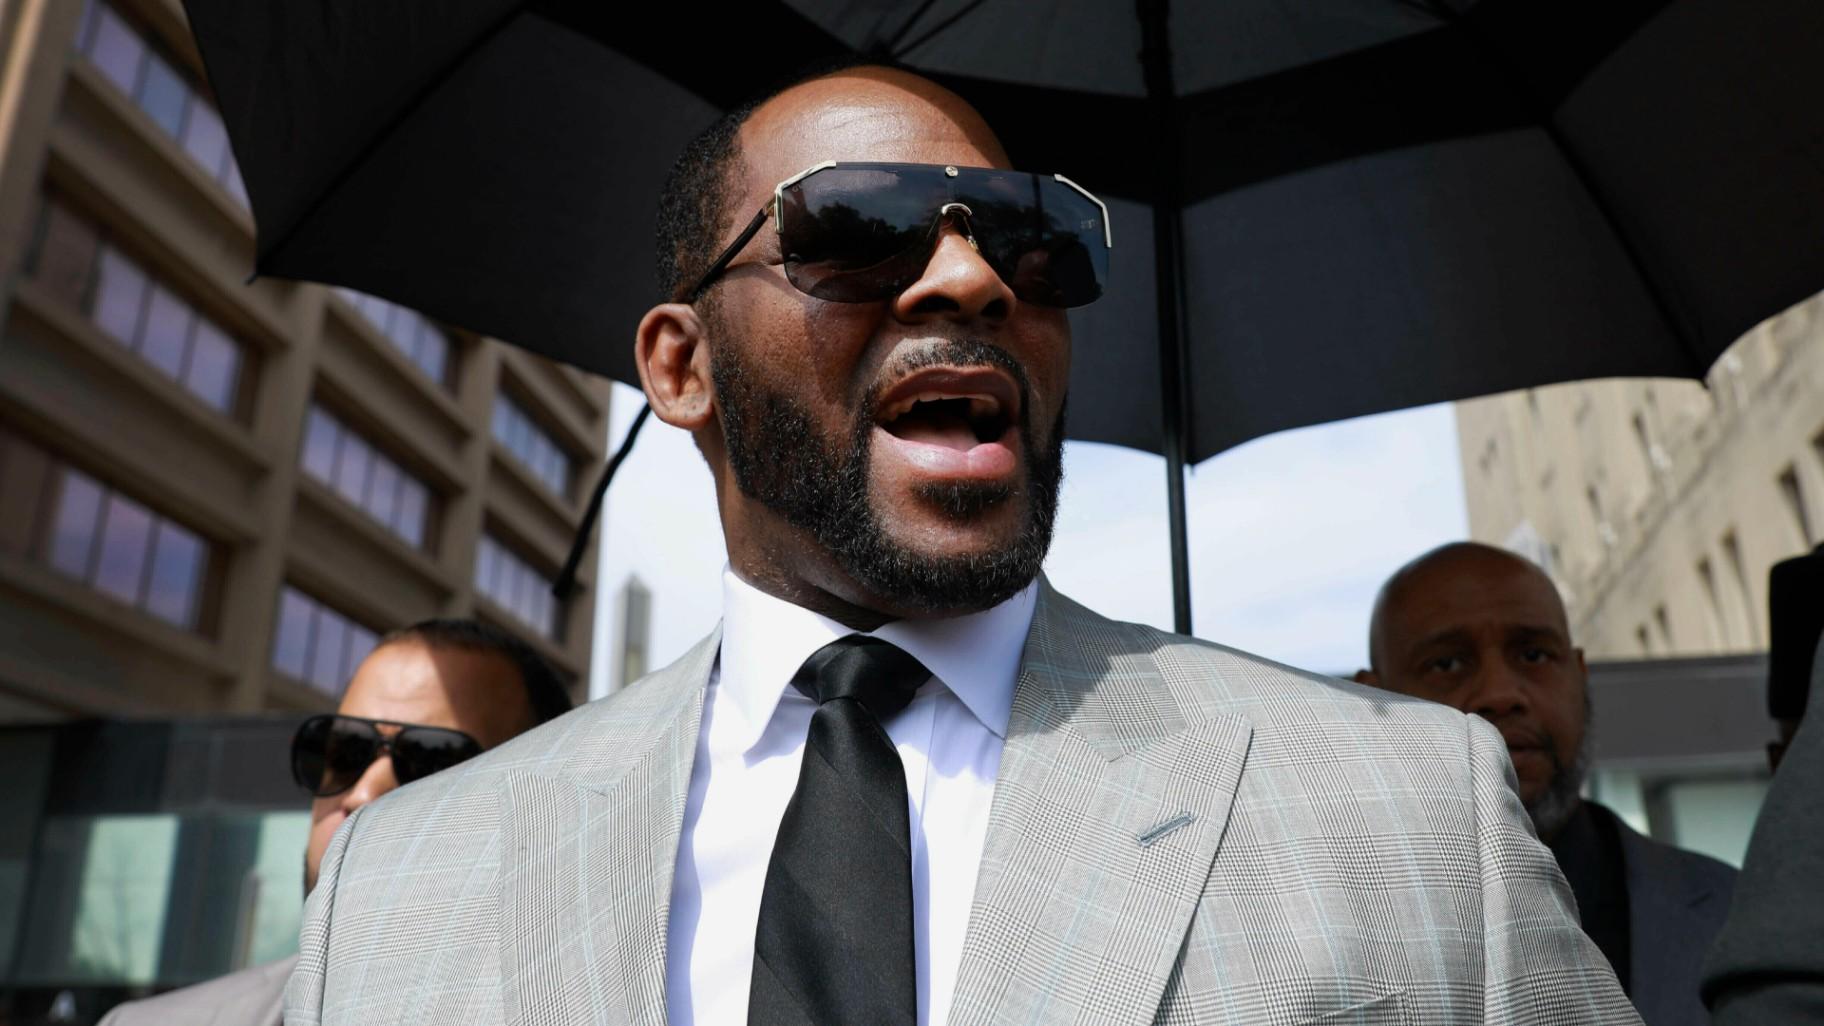 Musician R. Kelly leaves the Leighton Criminal Court building in Chicago on June 6, 2019. Kelly’s federal trial starts Monday in Chicago. (AP Photo / Amr Alfiky, File)